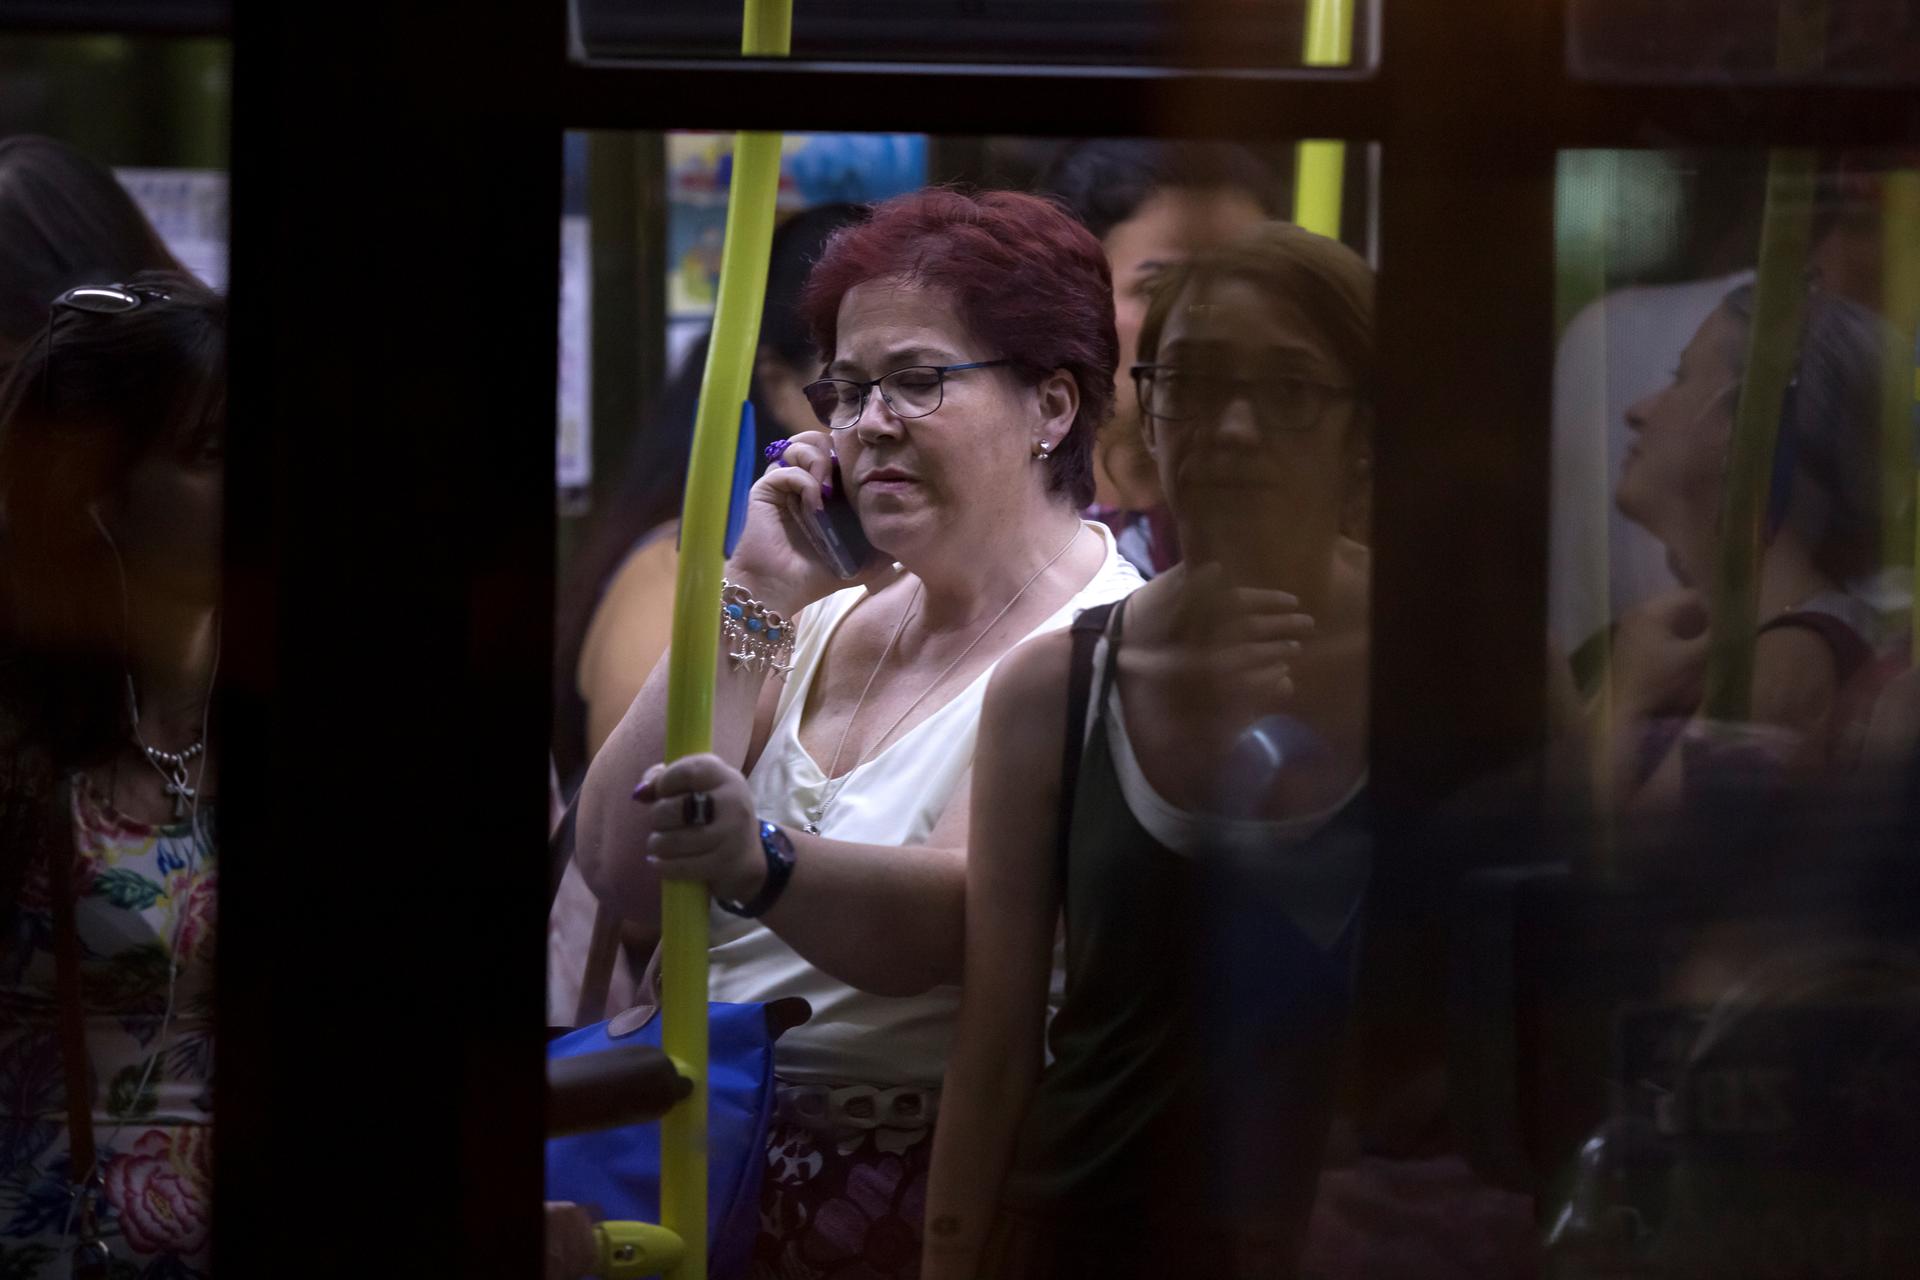 A woman talks on her cellphone on a bus in Madrid.